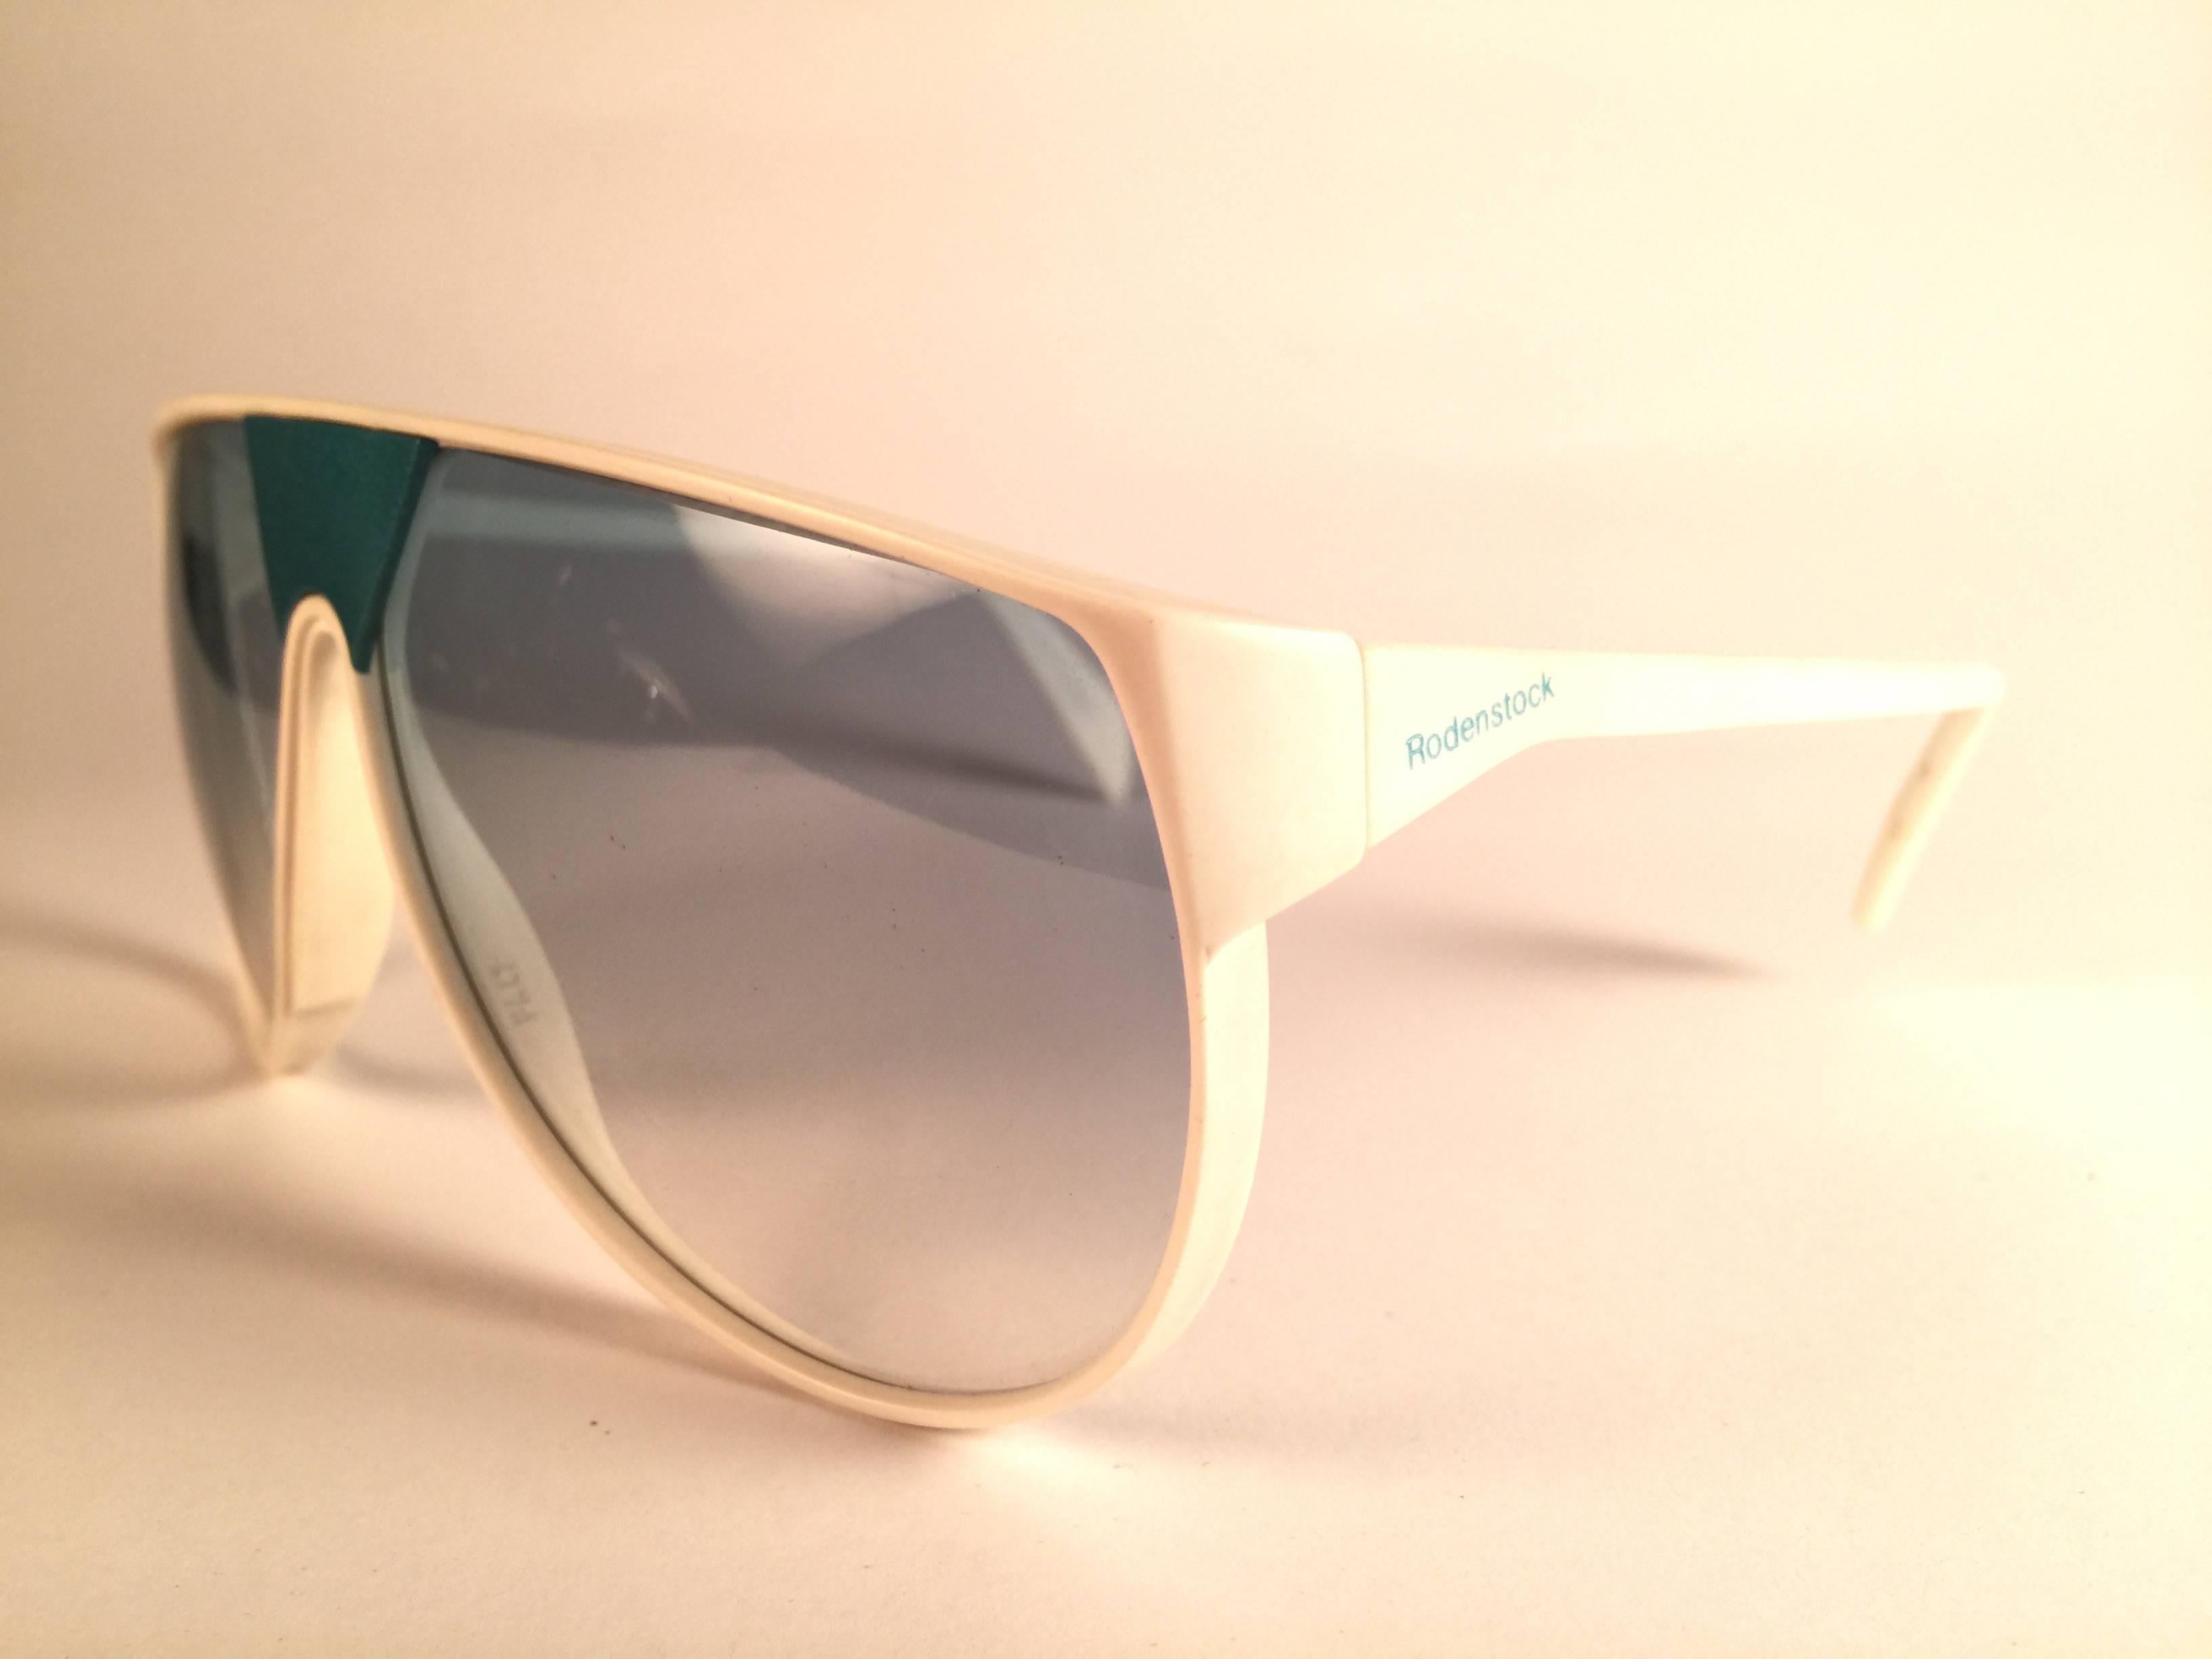 New Vintage Rodenstock sunglasses.  

White frame with turquoise accents sporting a pair of grey gradient lenses.  Never worn or displayed. 
This item may show minor sign of wear due to nearly 40 years of storage.  Designed and produced in Germany.